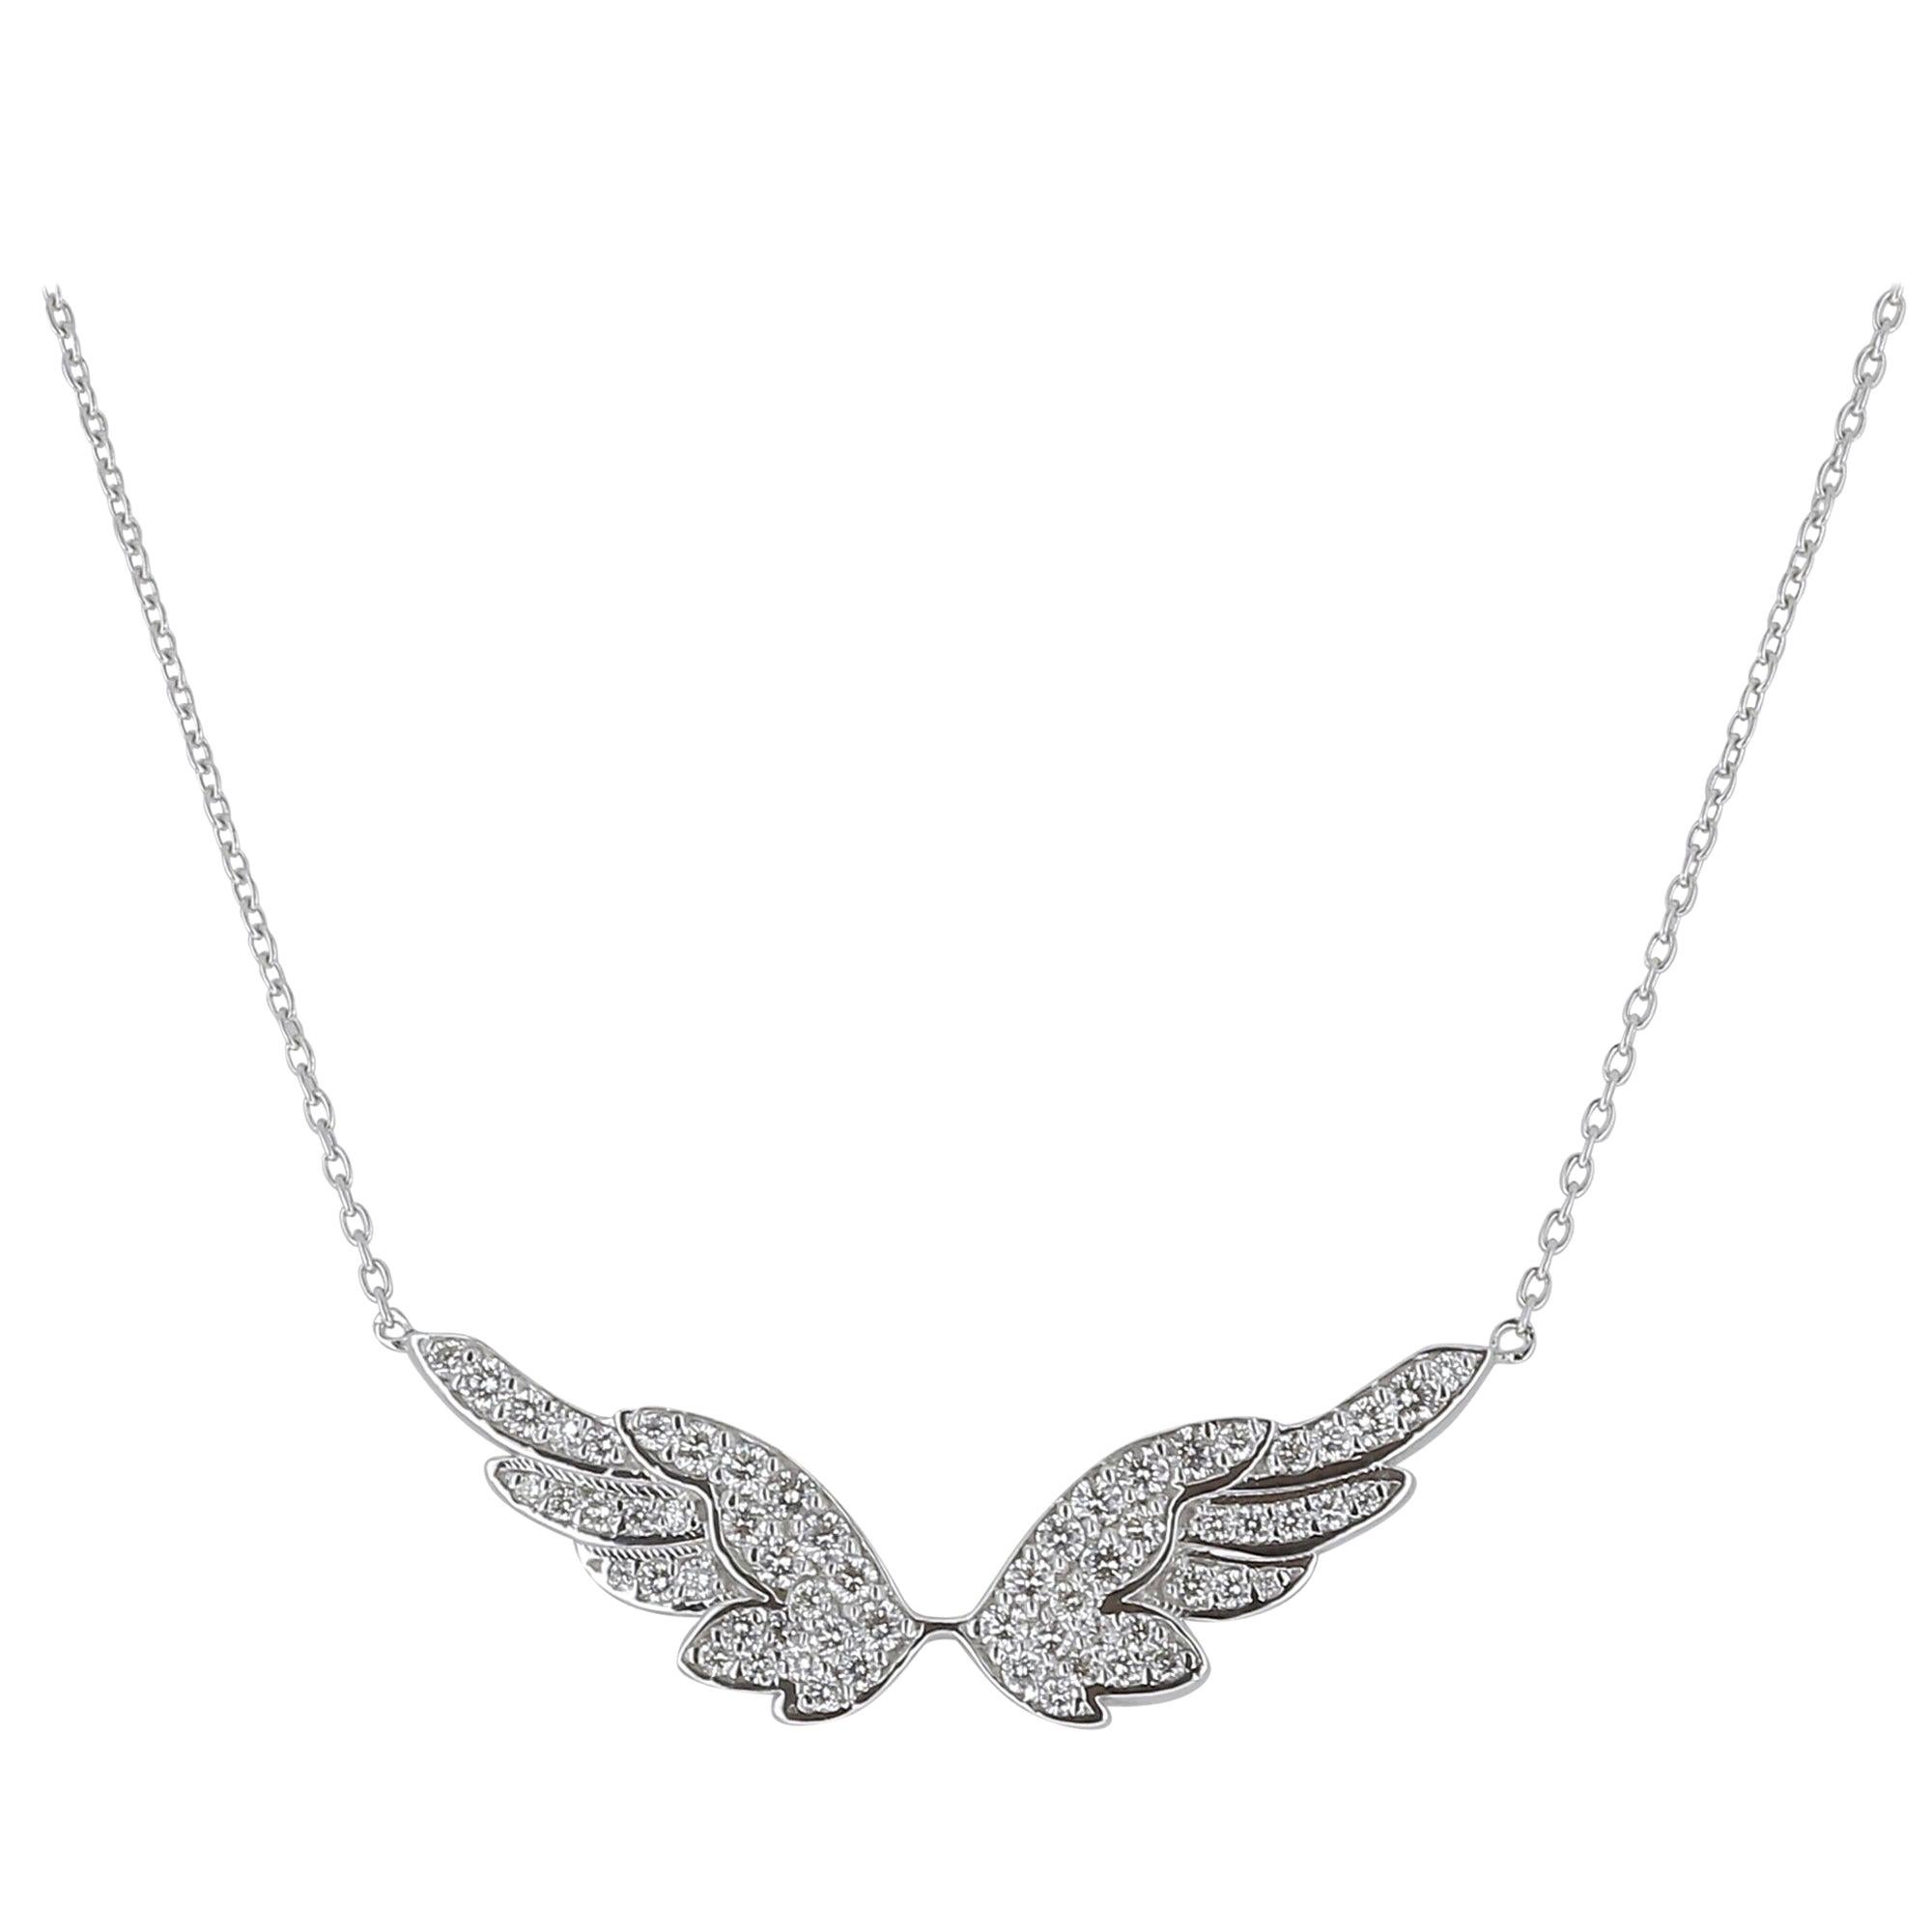 Angel Wing Pendant crafted from 9ct Gold. Made in Ireland